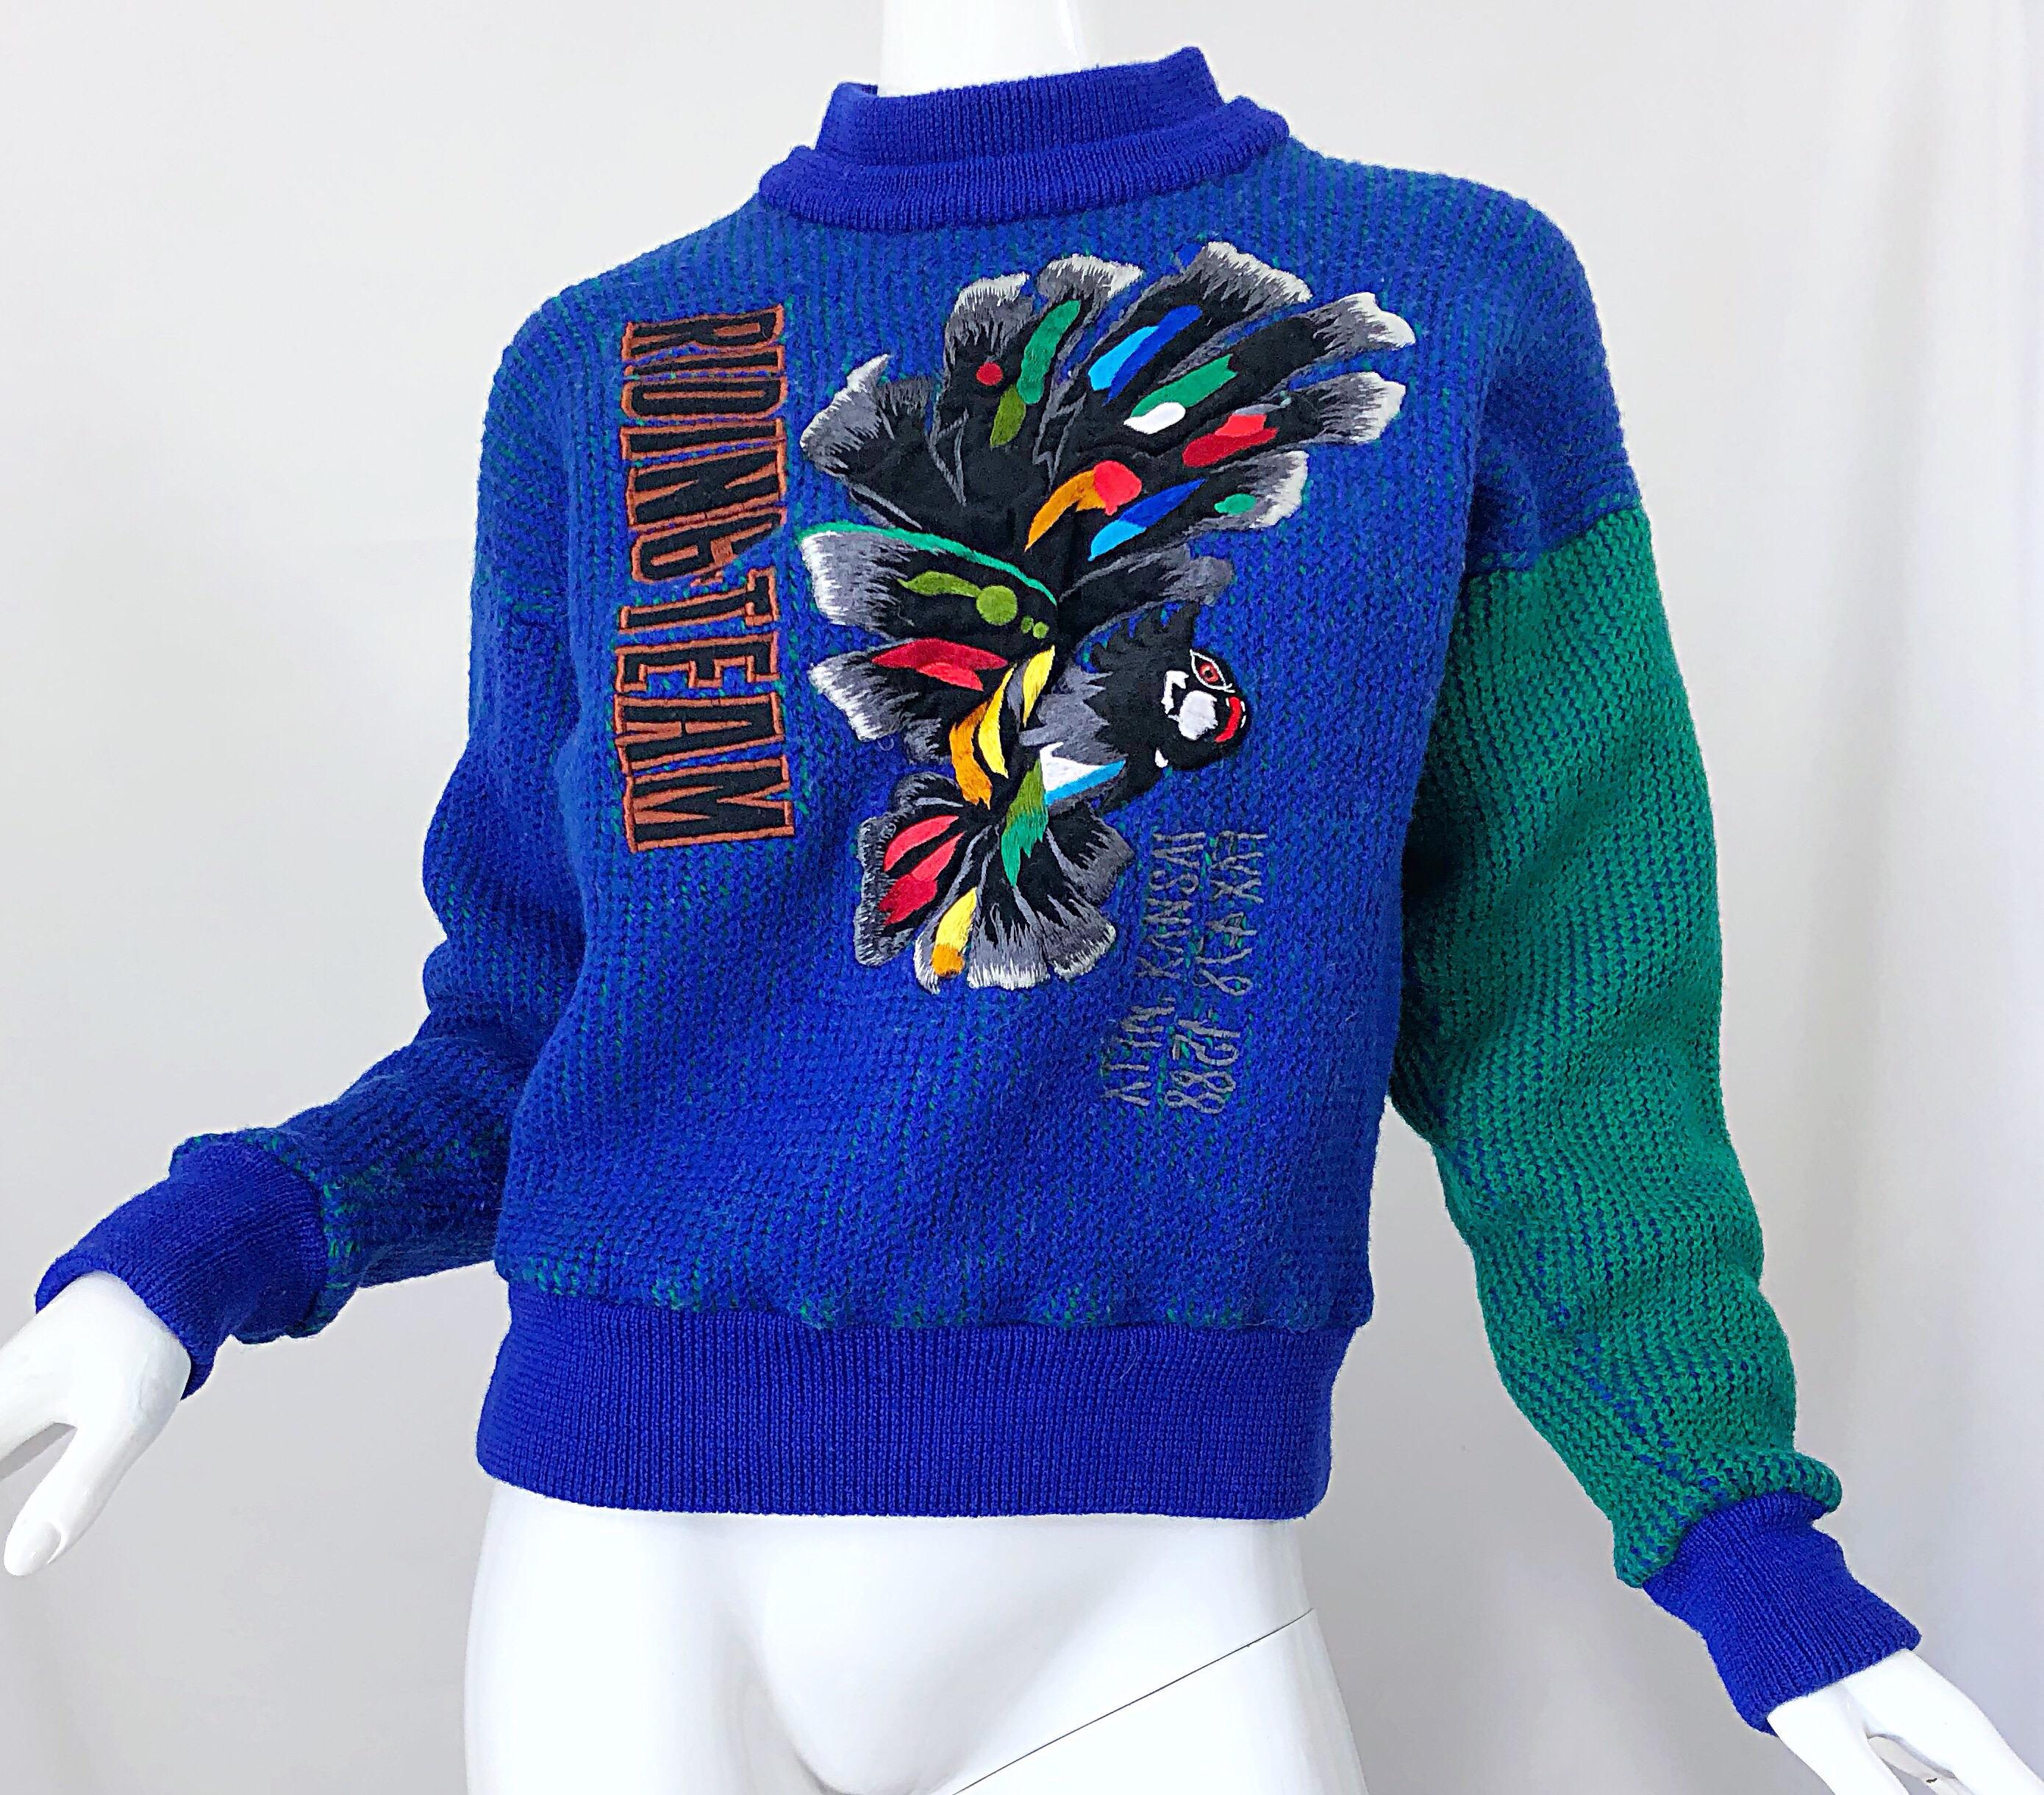 Kansai Yamamoto 1980s Riding Team Royal Blue Embroidered Novelty Wool Sweater For Sale 2